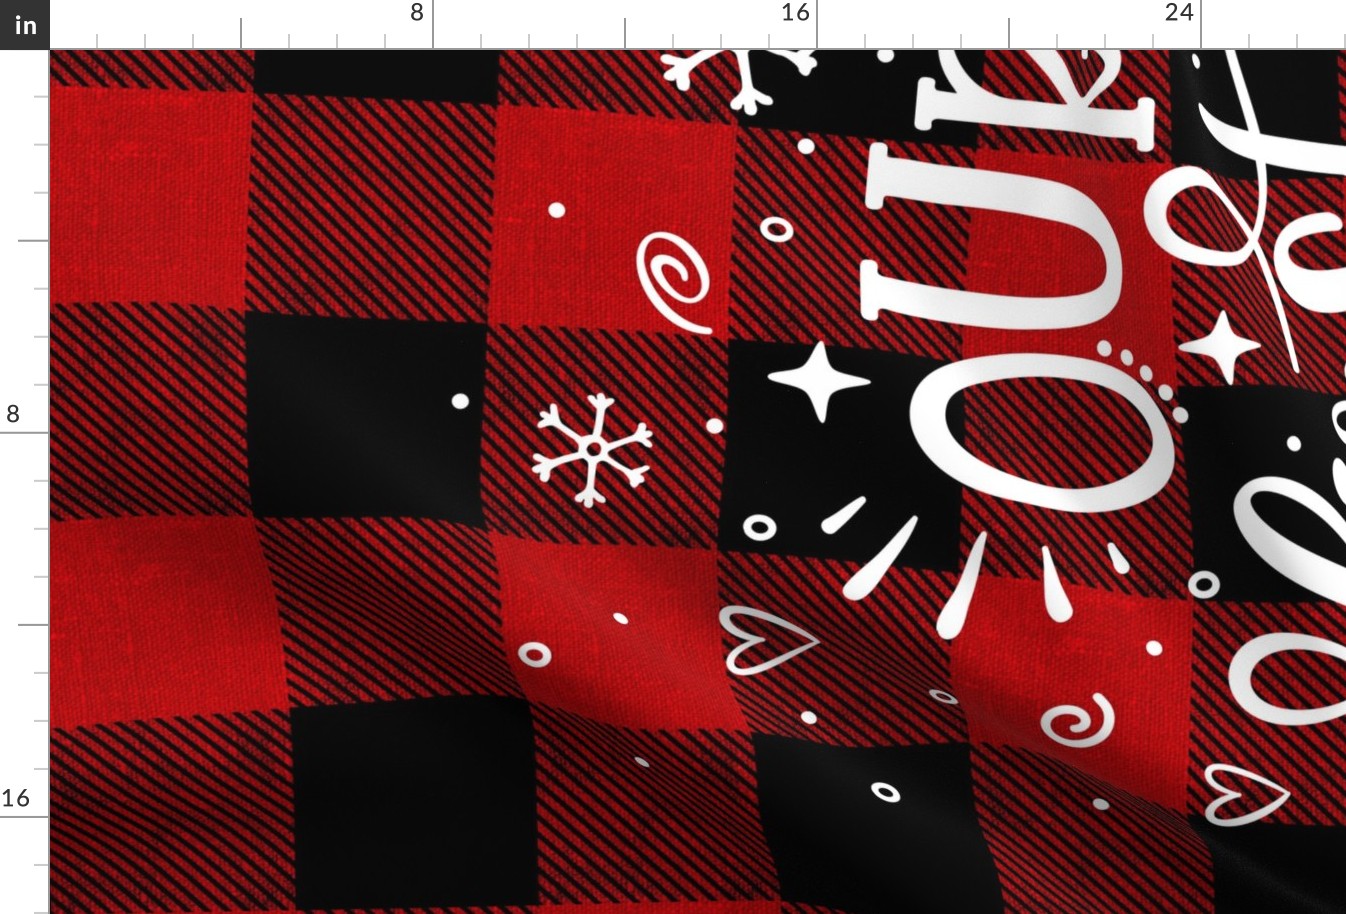 Our First Christmas 2020 Red Buffalo Plaid Minky rotated -54 x 36 inches